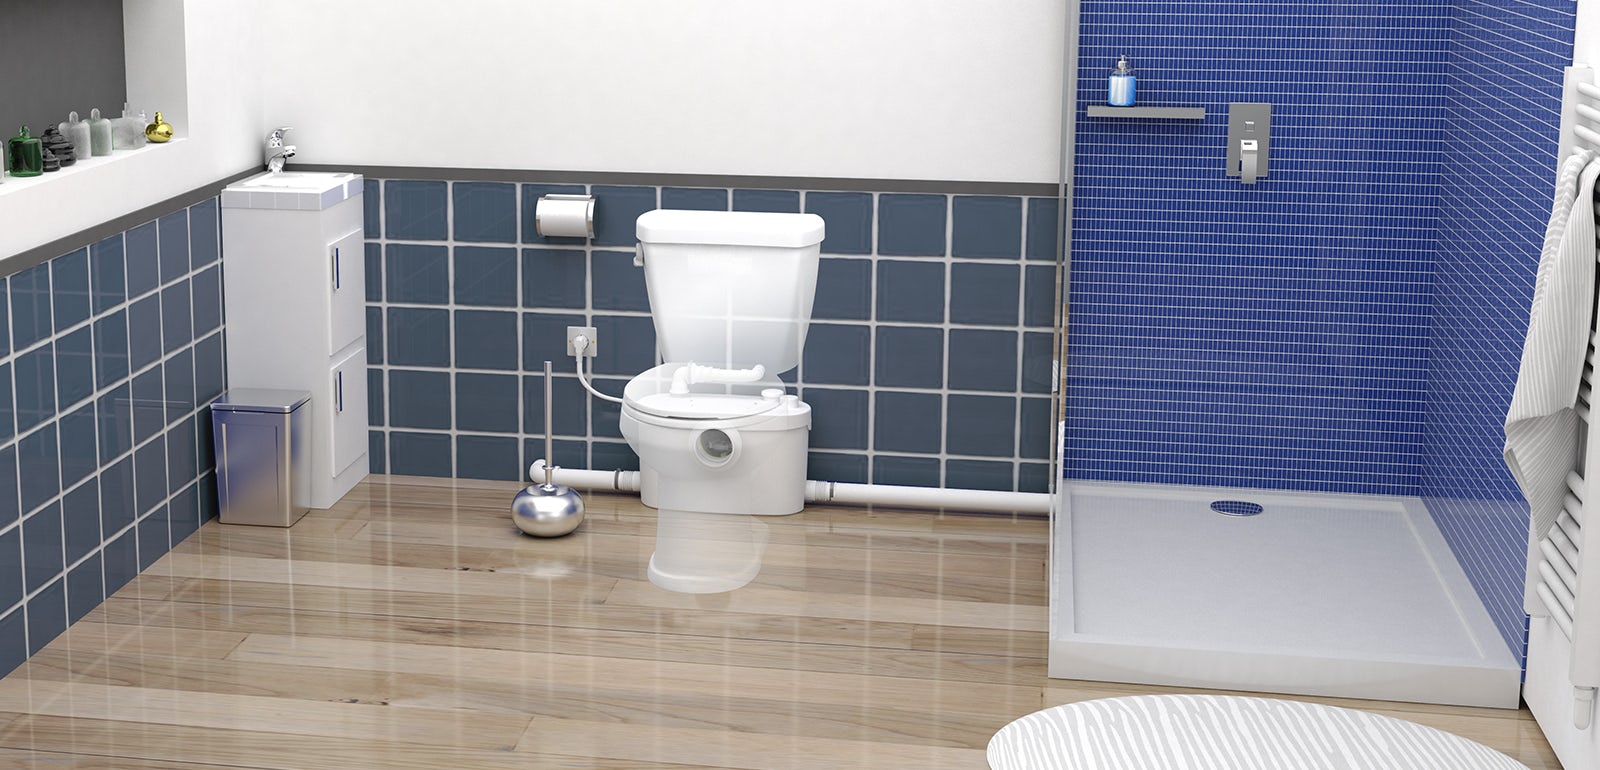 It Is Possible to Add a Bathroom Anywhere: How Does a Macerator